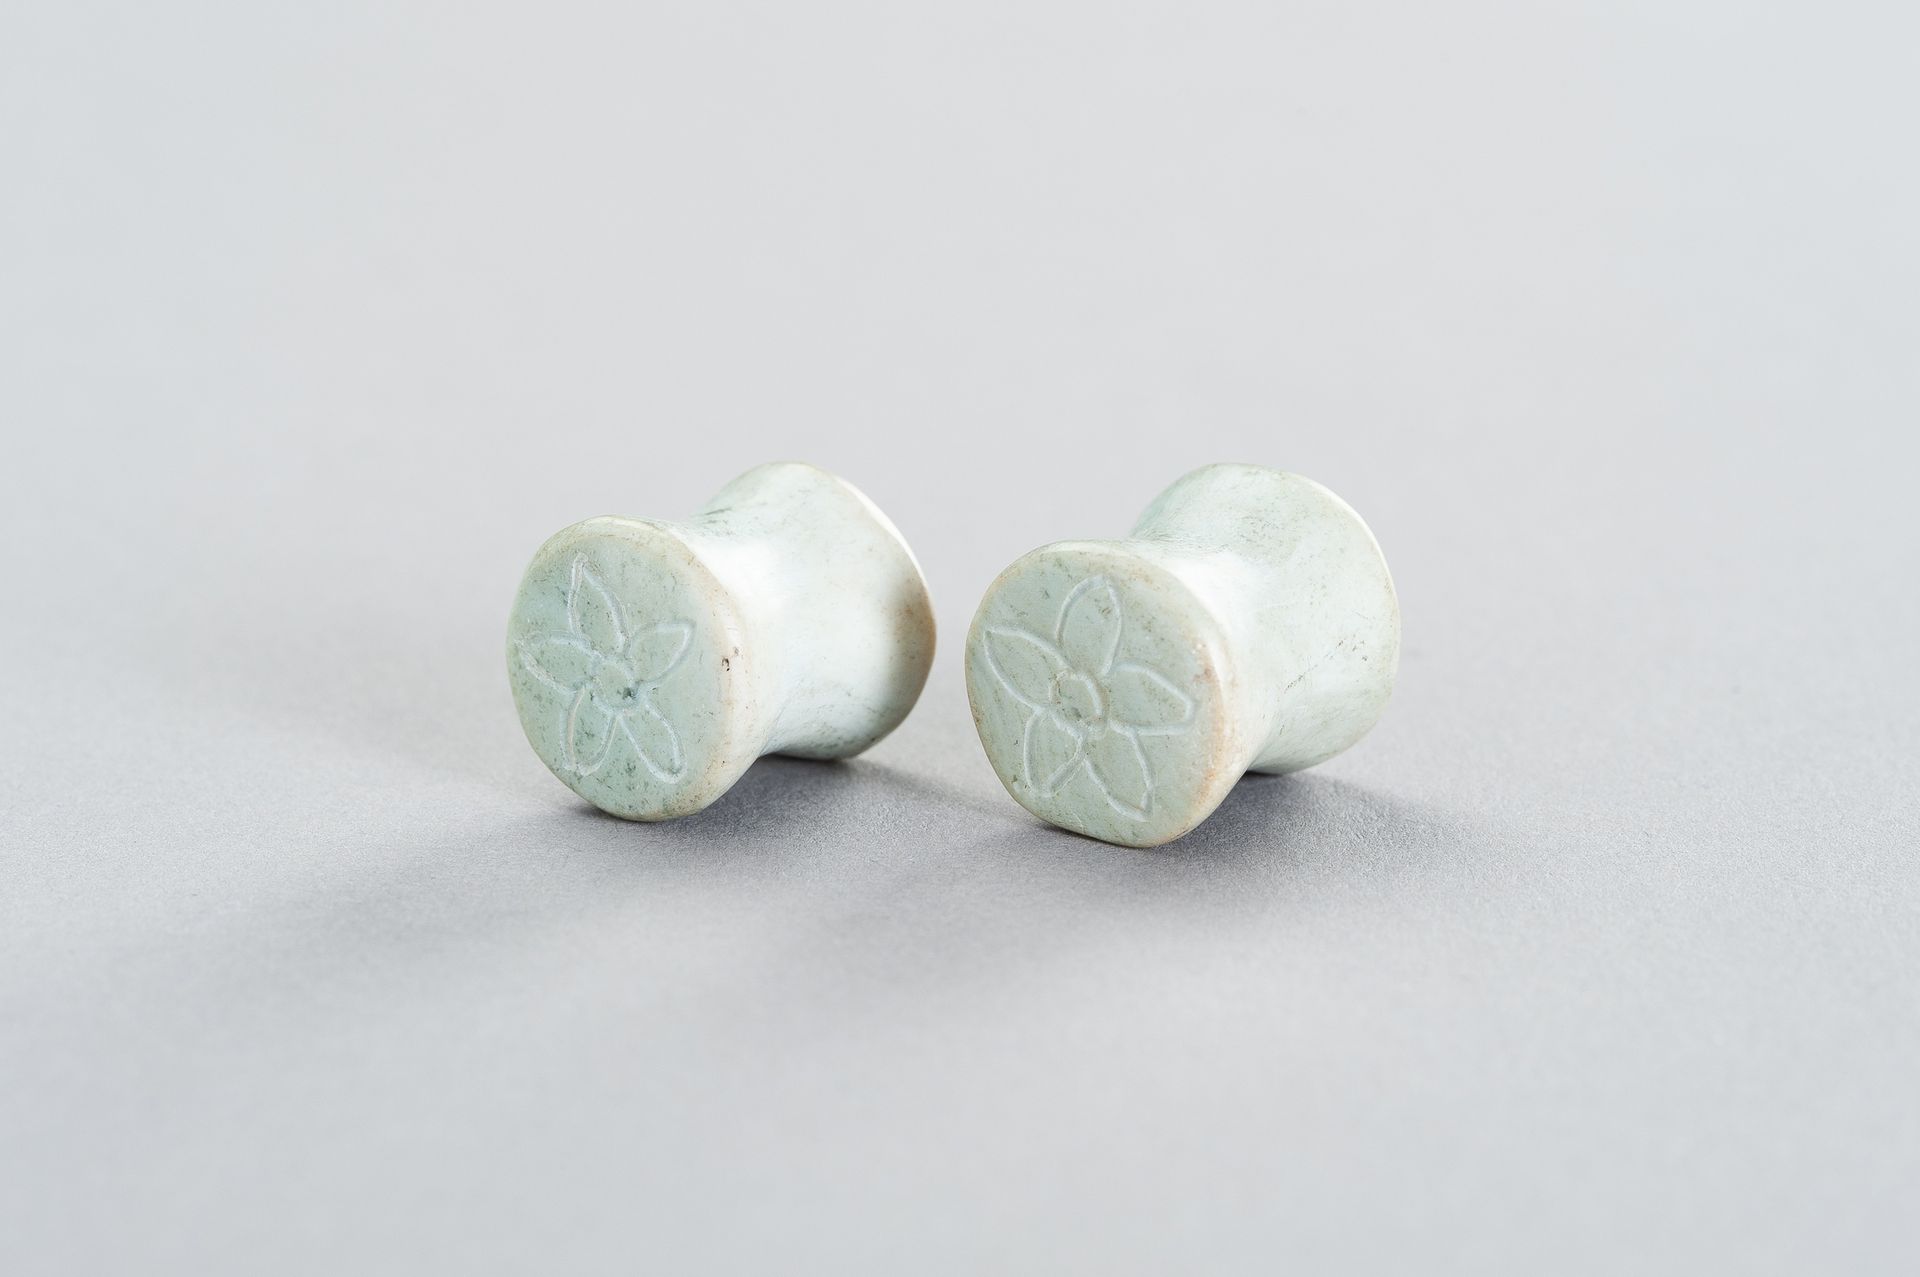 A PAIR OF STONE EARPLUGS A PAIR OF STONE EARPLUGS
Southeast Asia, early 20th cen&hellip;